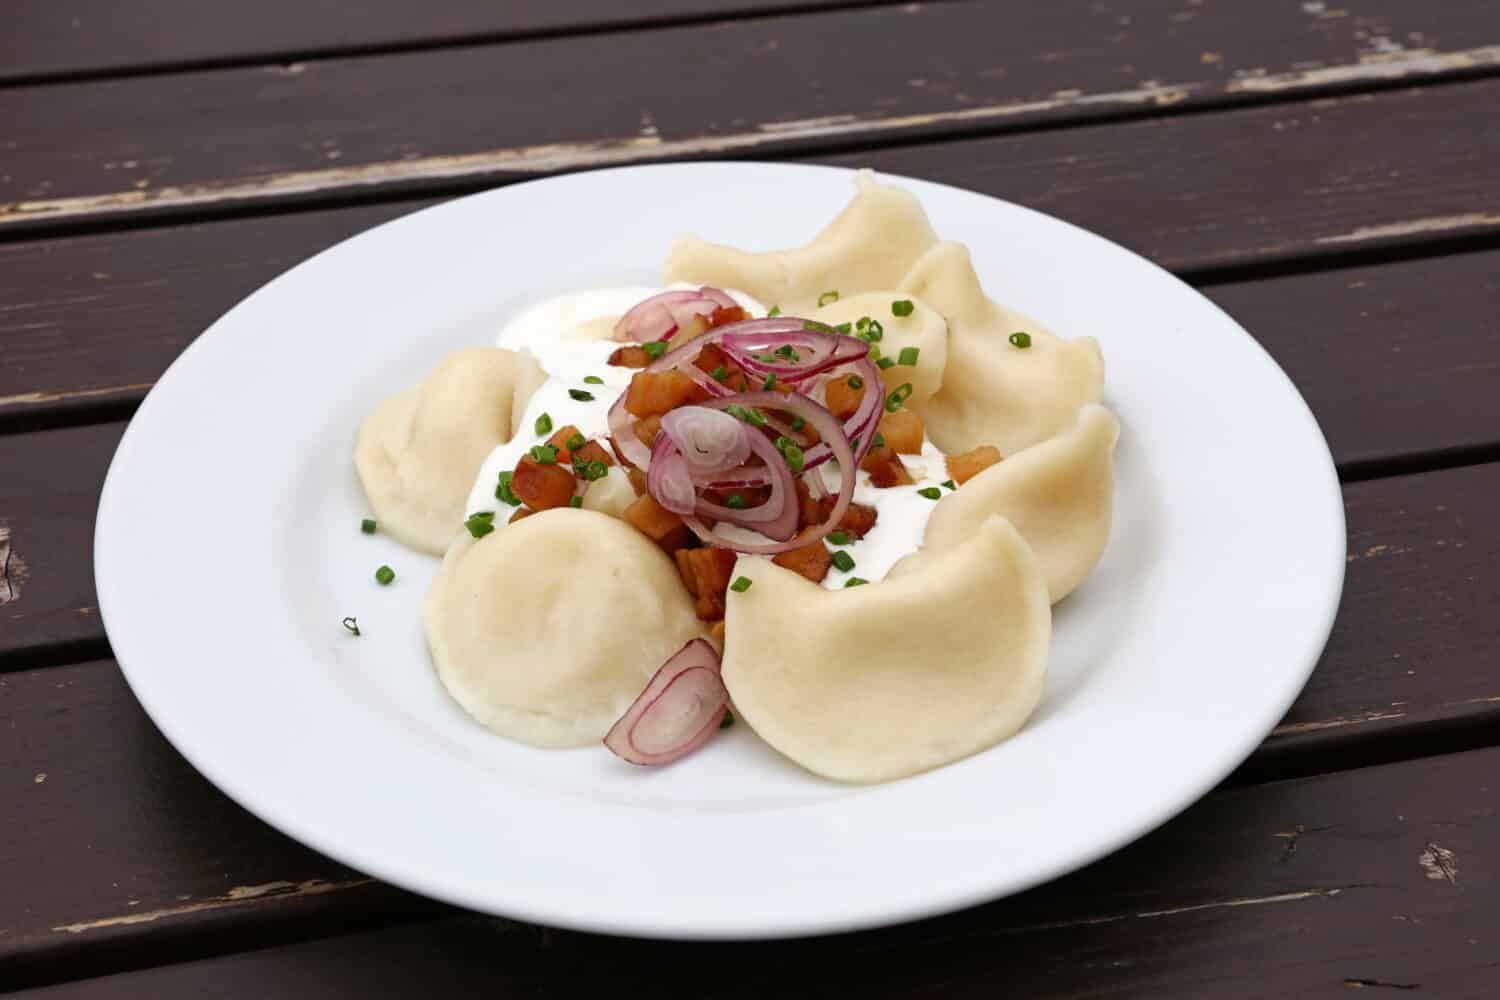 Plate of pierogi or varenyky stuffed filled dumplings with sour cream, bacon and onion, traditional East Europe cuisine meal popular in Poland, Ukraine, Slovakia, Russia, close up, high angle view